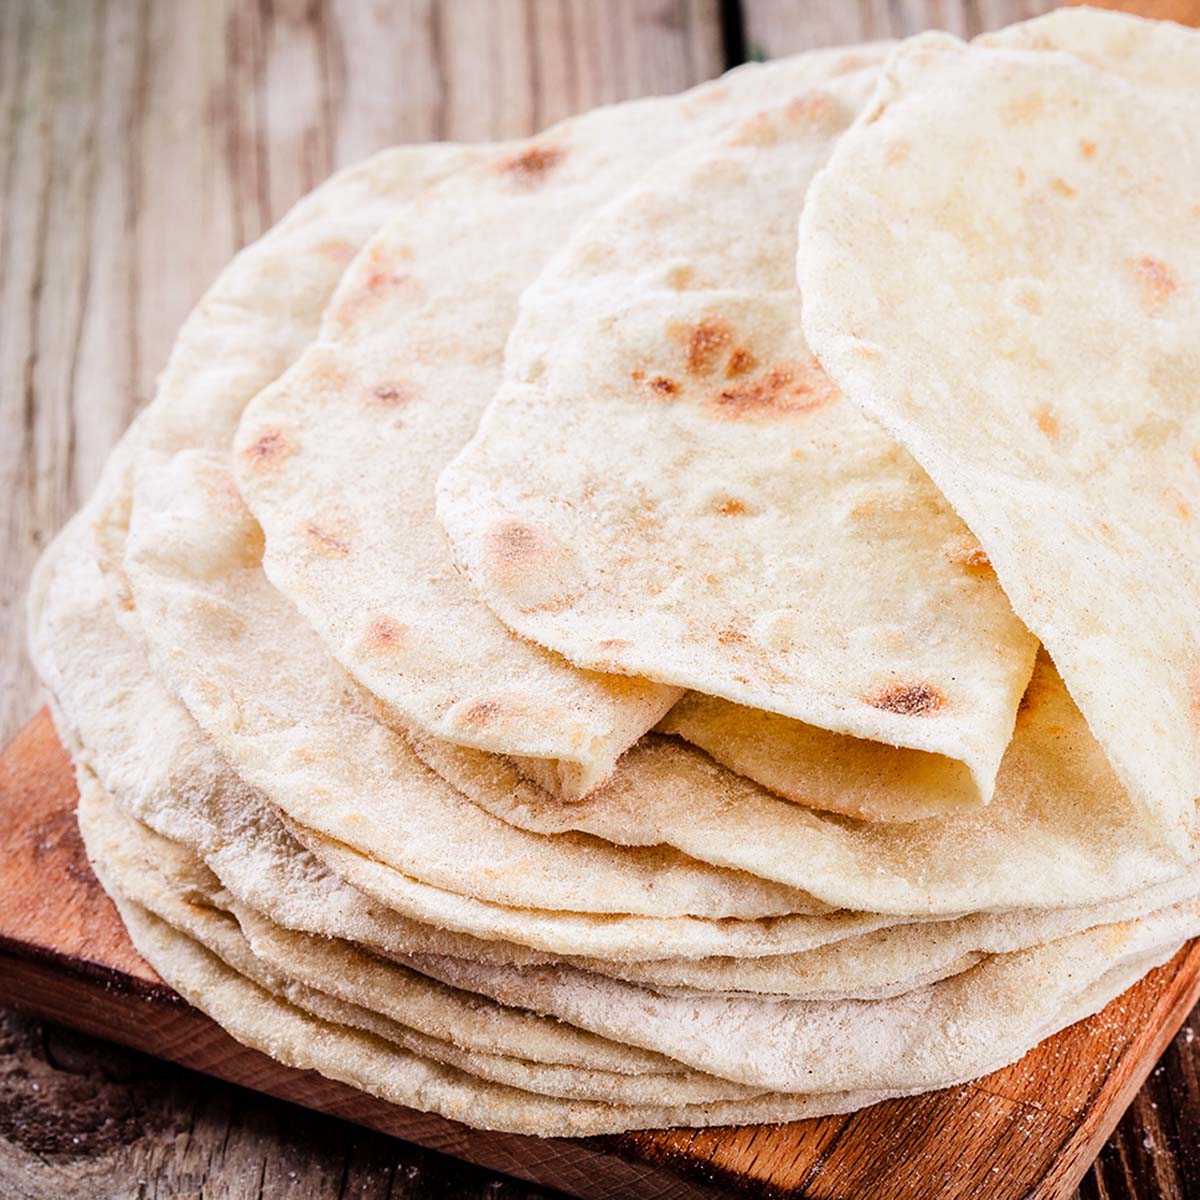 The key ingredients are wheat flour, water, salt, oil, and baking powder. They're typically soft and pliable, making them a popular choice for tacos.